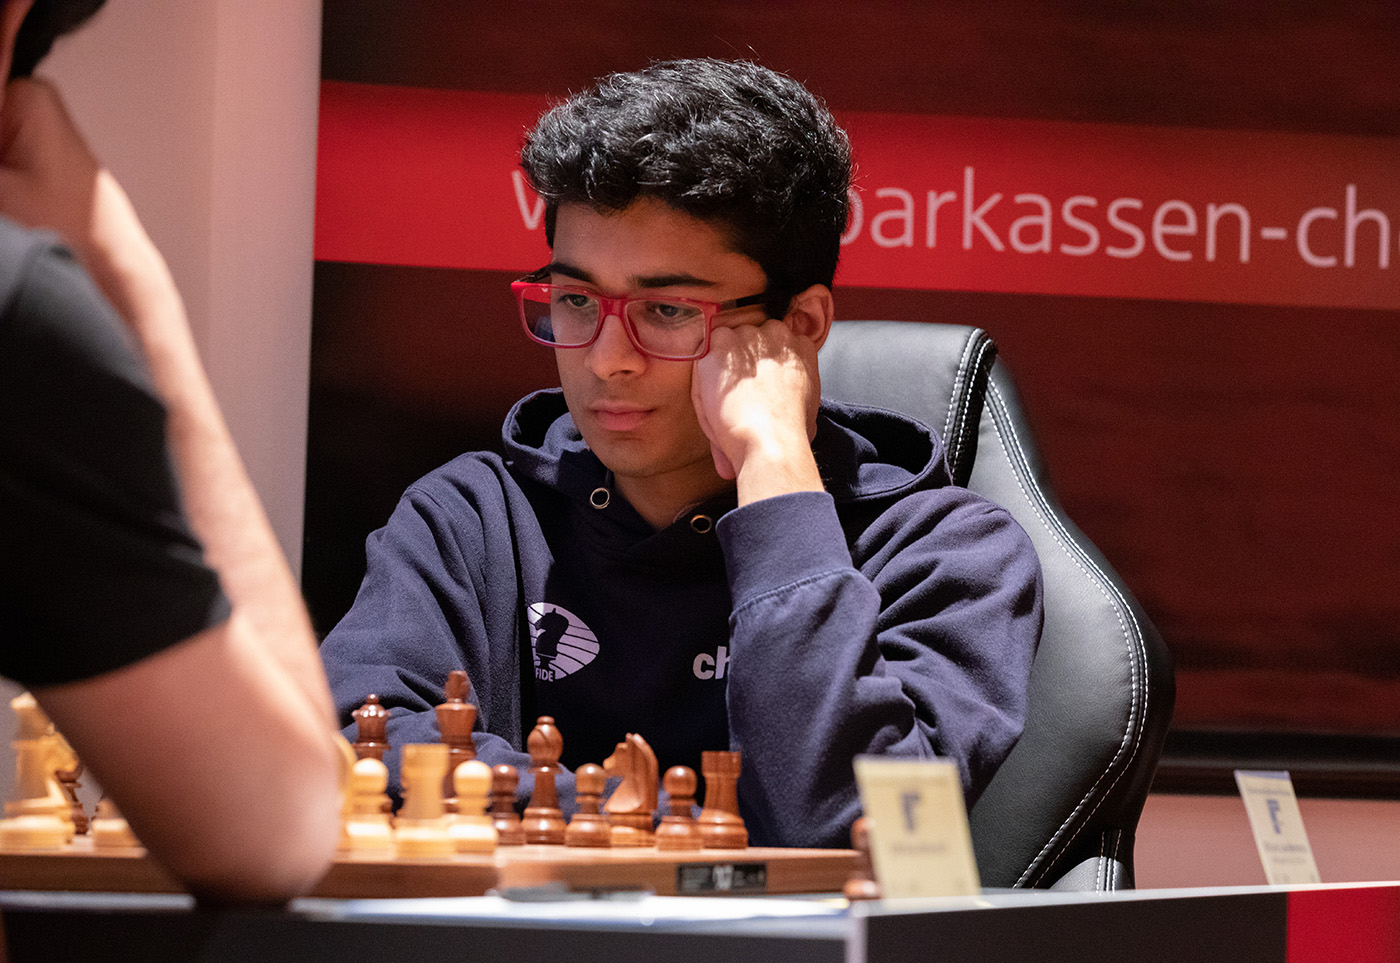 Last year's third-placed Grandmaster aims for top position again